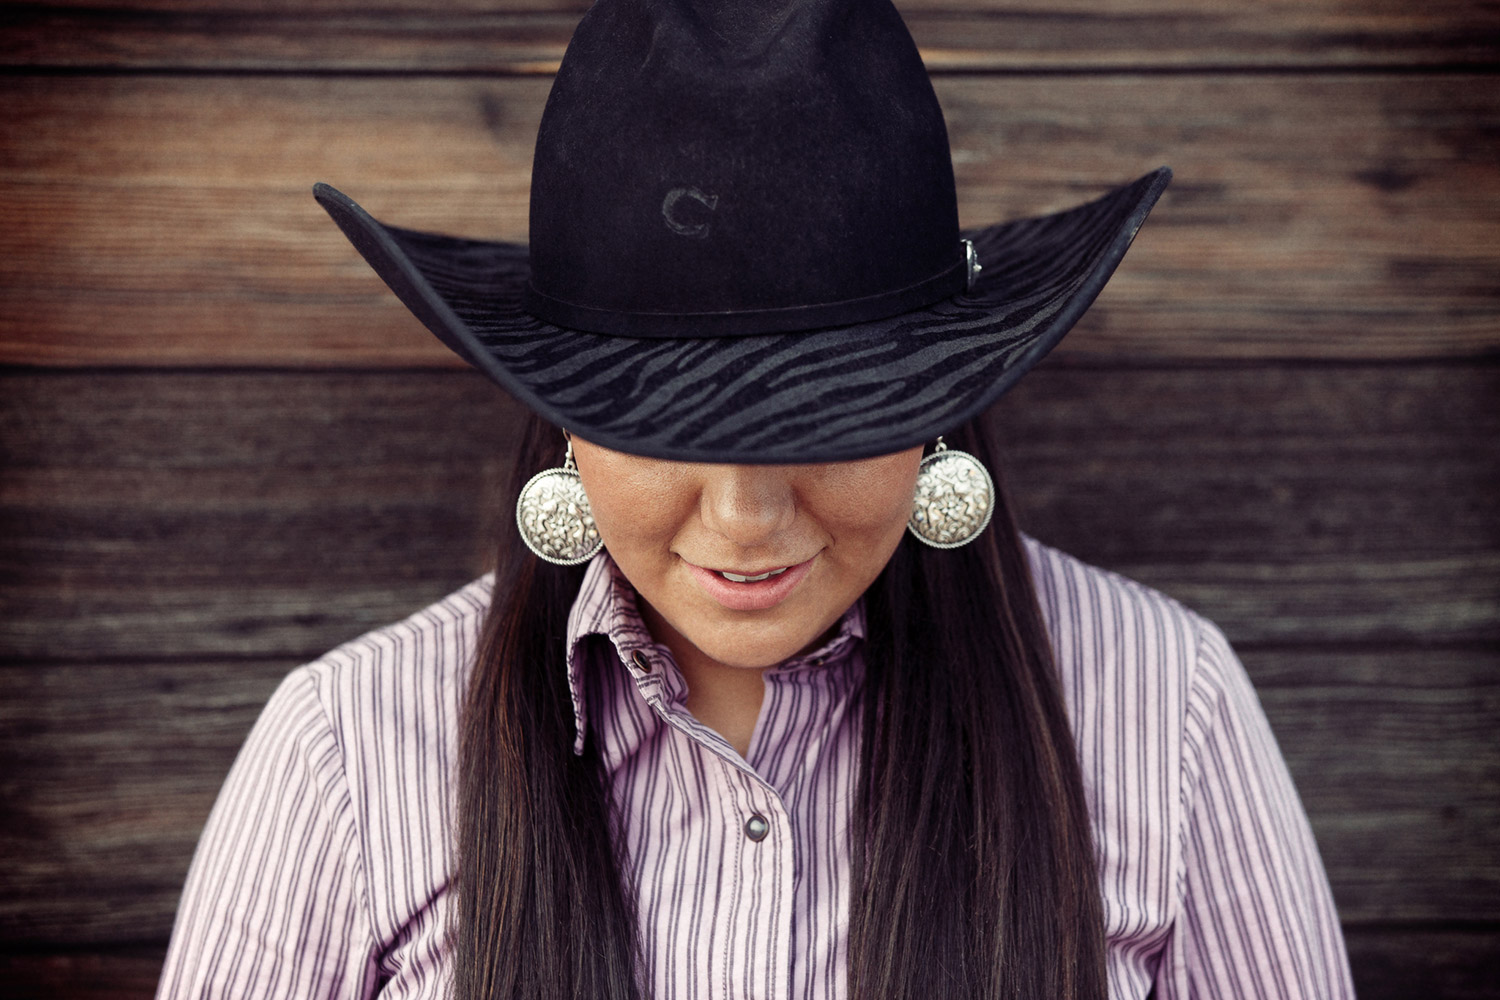 More cowgirl photos; this one is of a member of the MSU-Northern rodeo team poses for me outside of Havre, Montana.